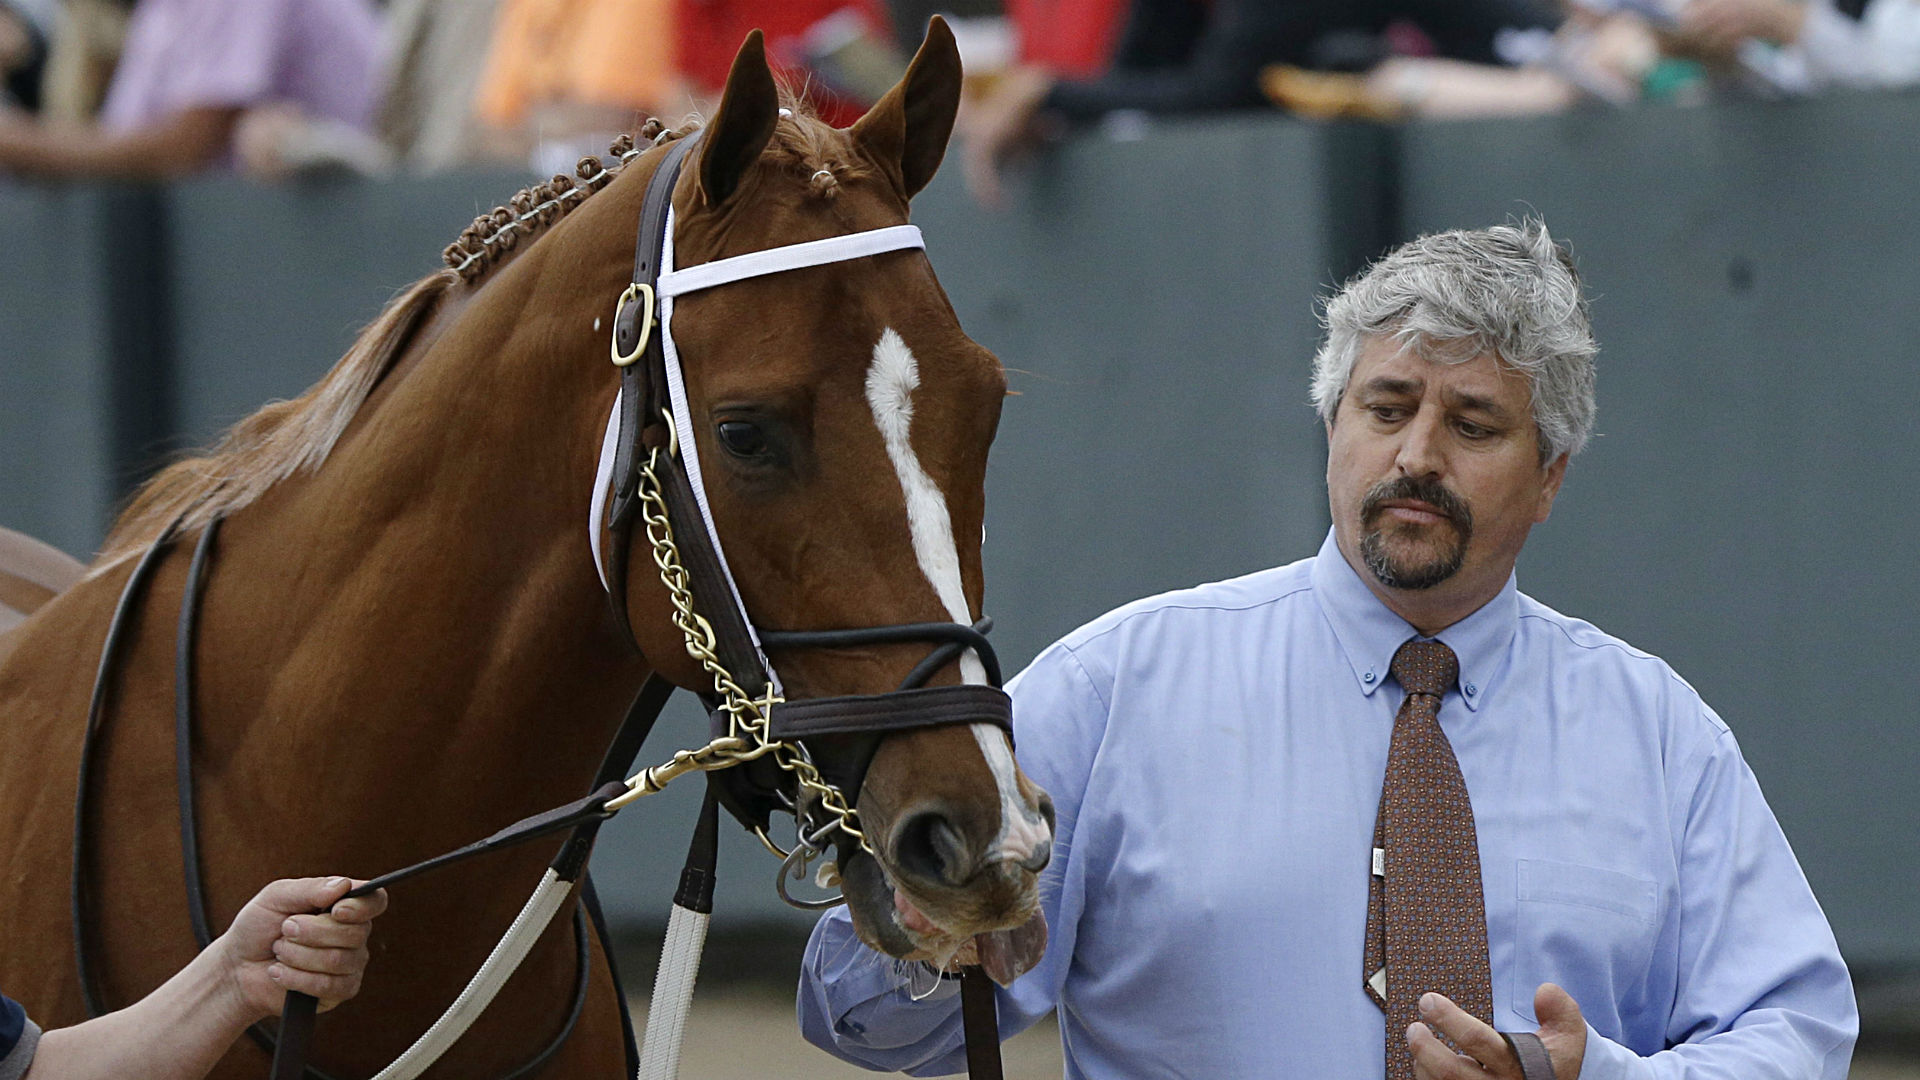 Kentucky Derby 2014 Some owners standing by controversial trainer